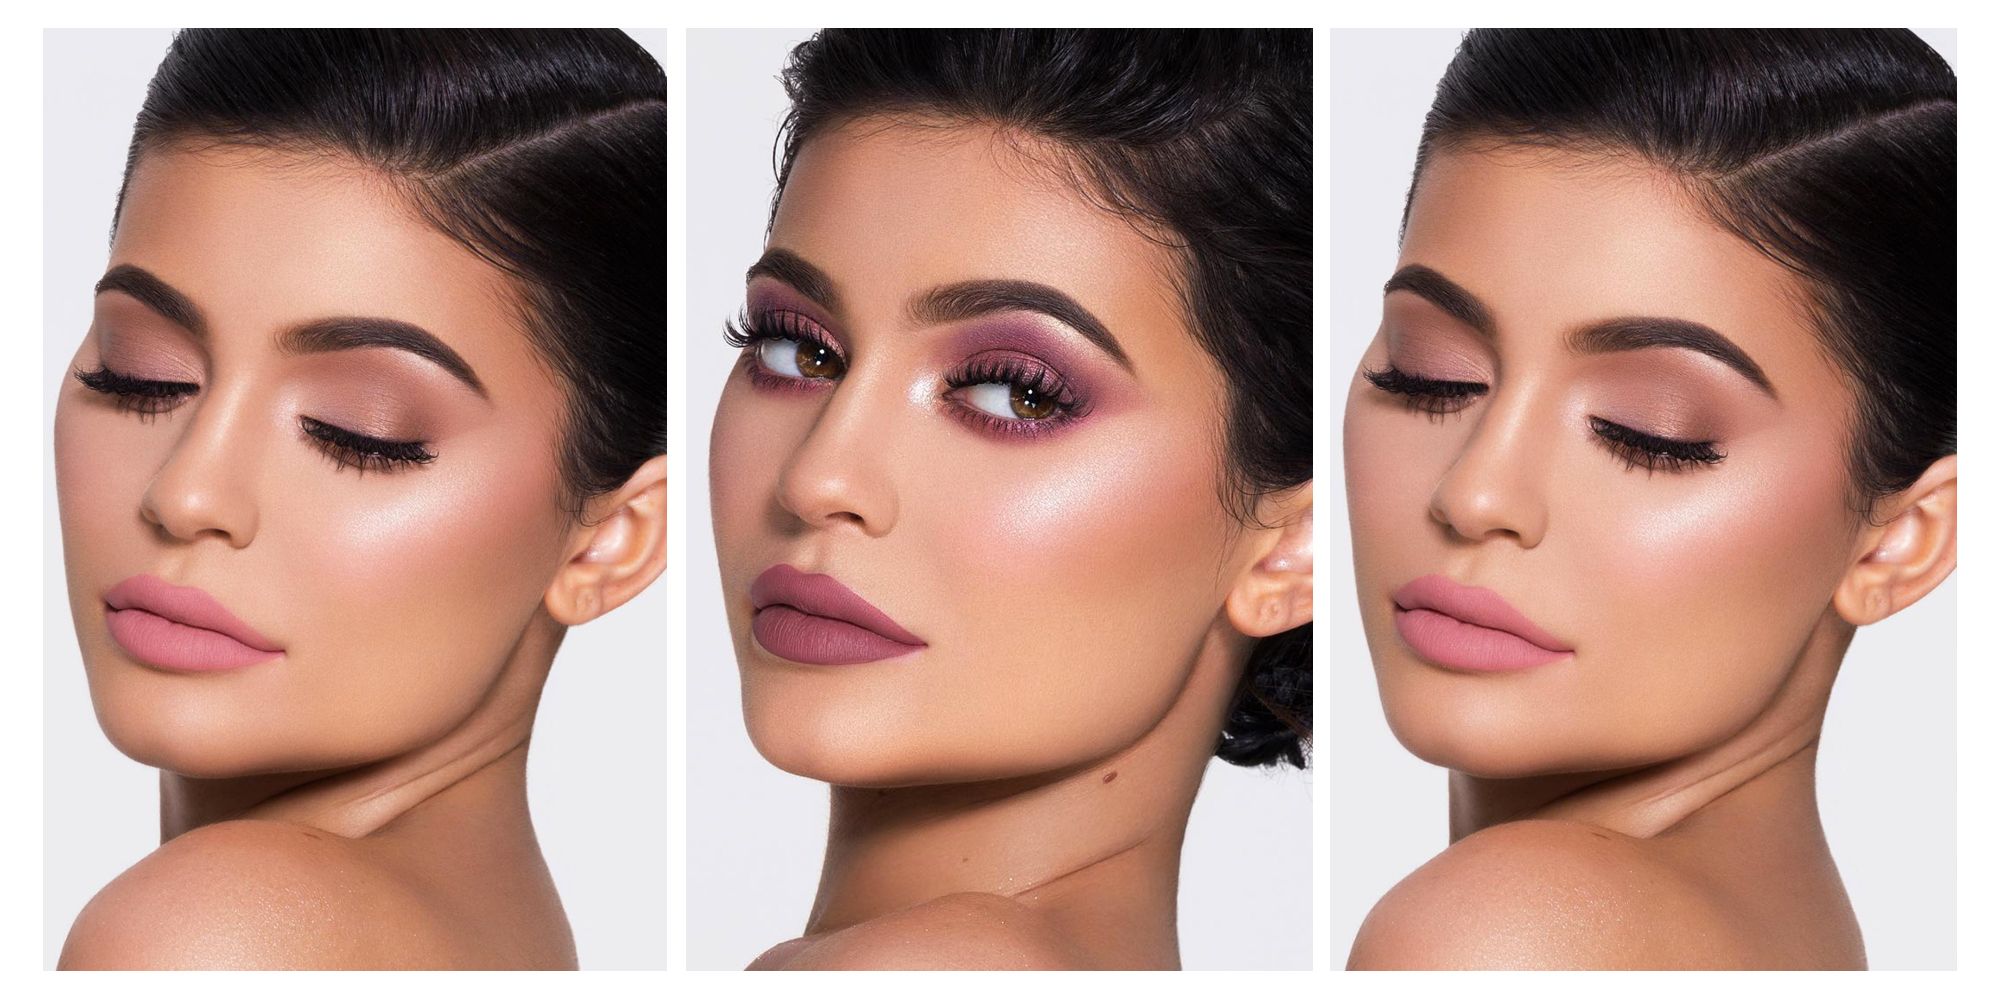 Kylie Cosmetics Makes $420 Million in 18 Months - Kylie Jenner on Kylie  Cosmetics Growth to WWD